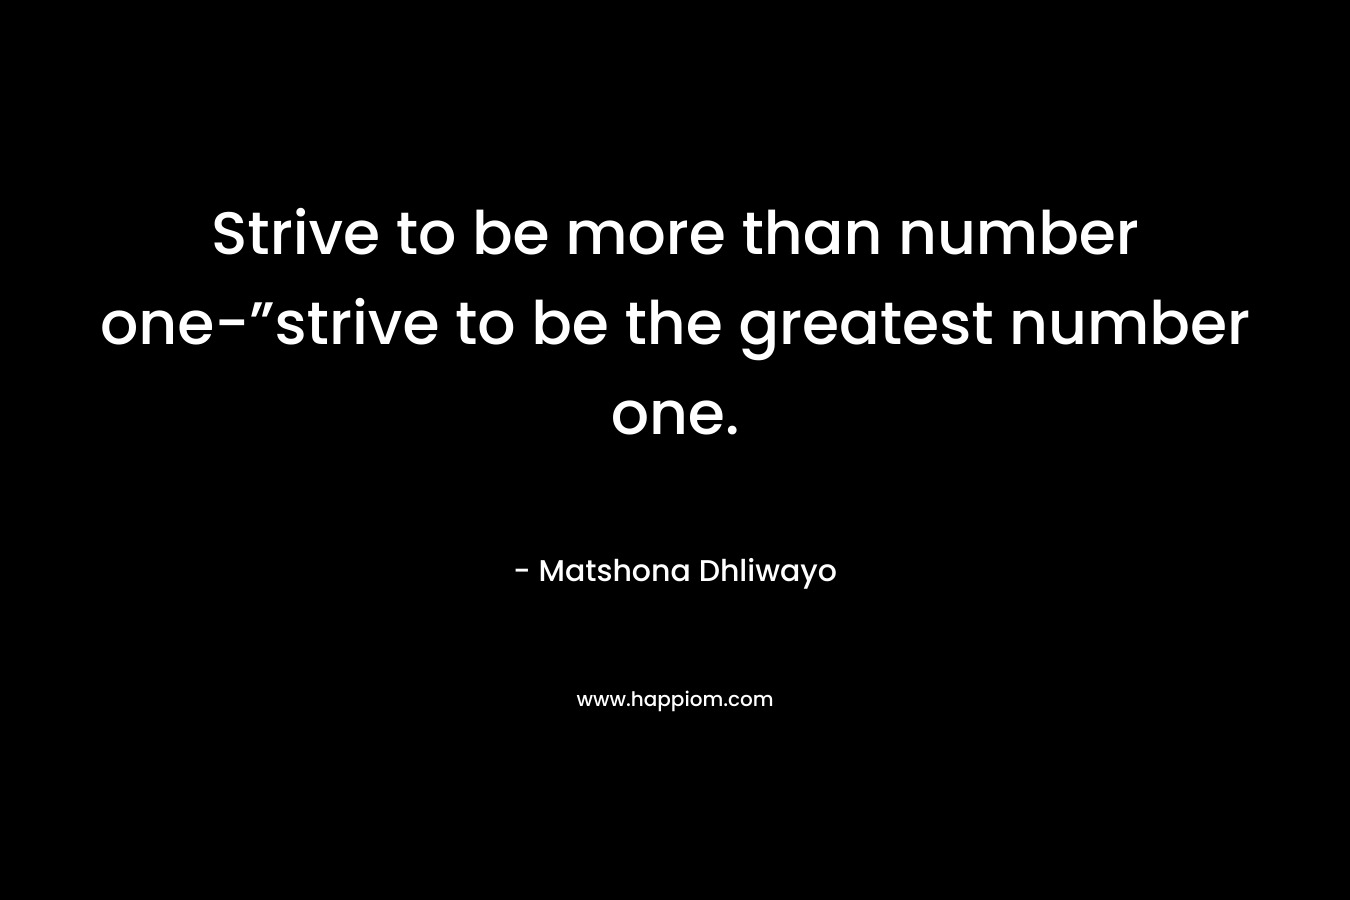 Strive to be more than number one-”strive to be the greatest number one.